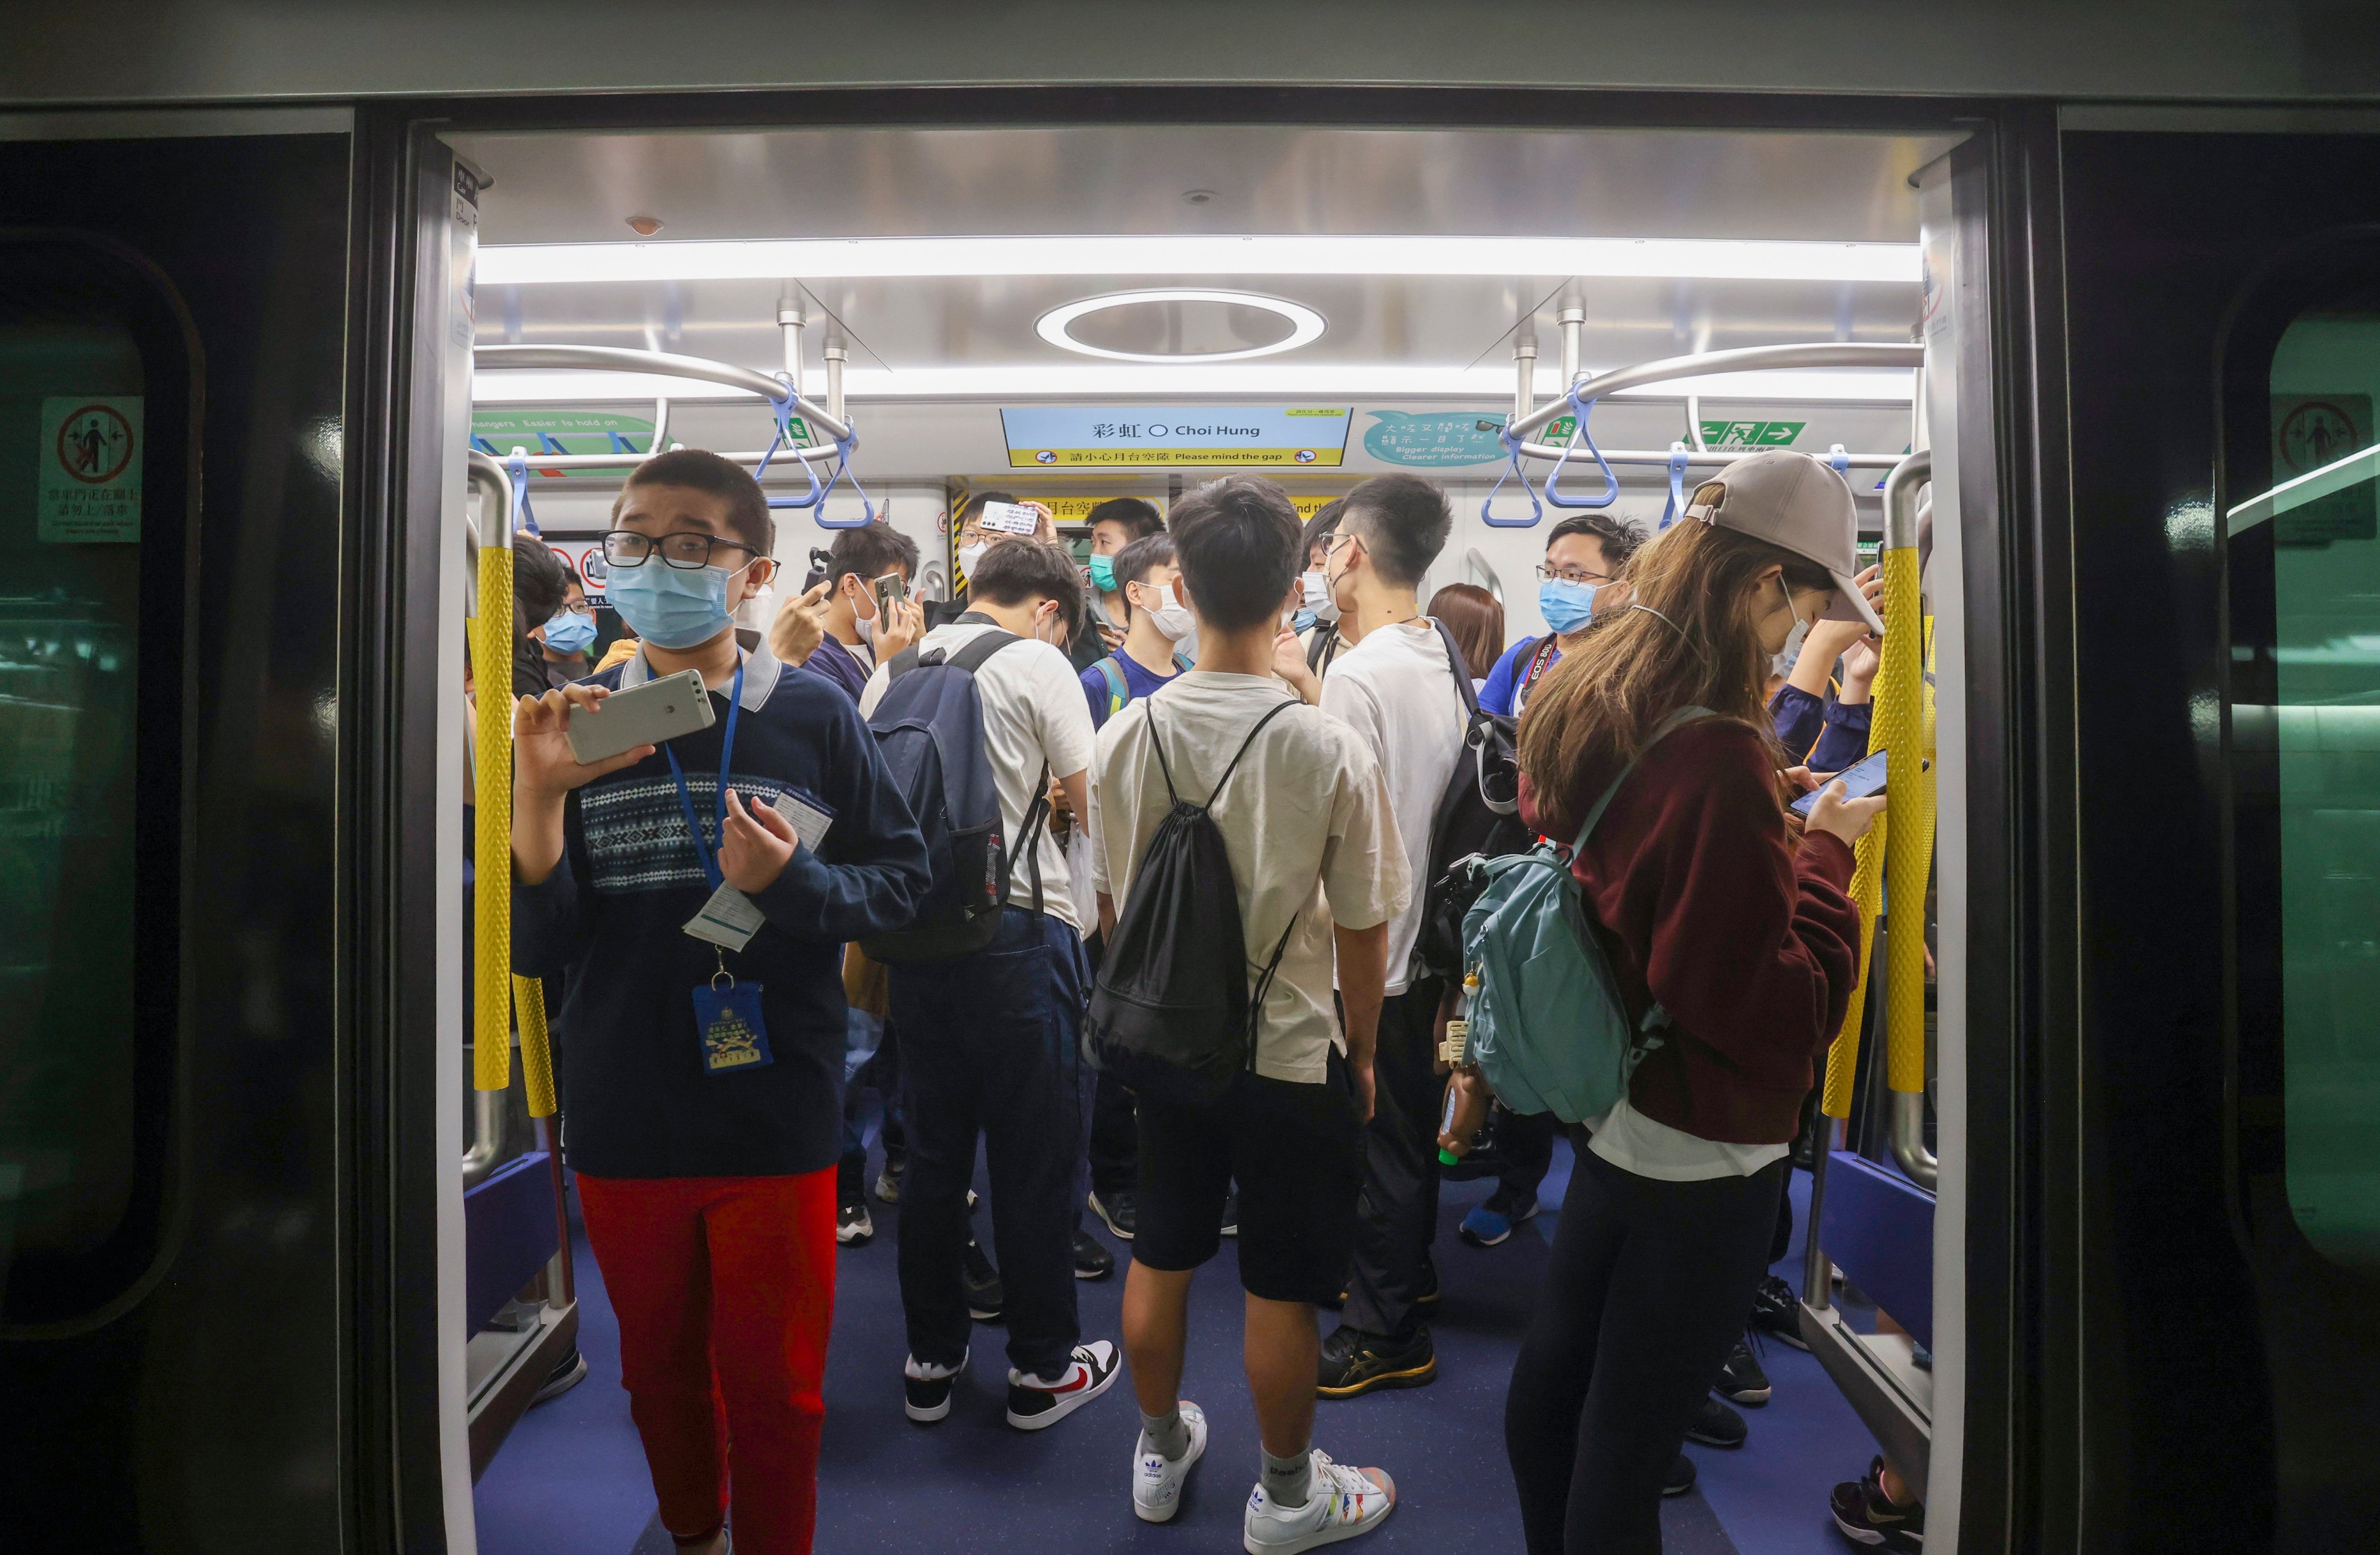 Rail fans take a new Q-train from Choi Hung MTR station on November 27, 2022. The Q-trains being rolled out on the Island and Tsuen Wan Lines were ordered nearly a decade prior. Photo: Jonathan Wong 